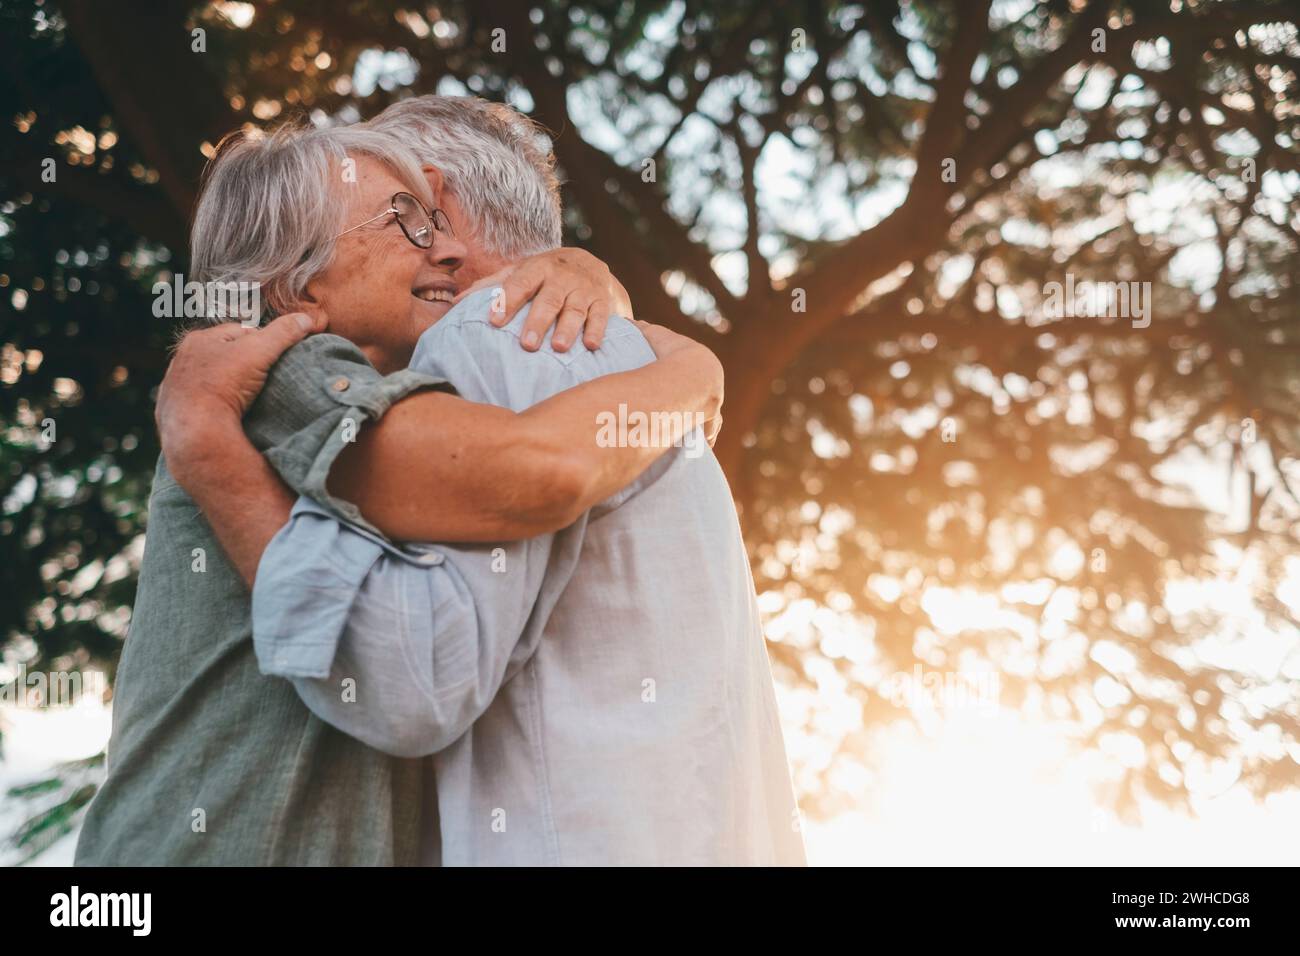 Head shot close up portrait happy grey haired middle aged woman snuggling to smiling older husband, enjoying tender moment at park. Bonding loving old family couple embracing, feeling happiness. Stock Photo